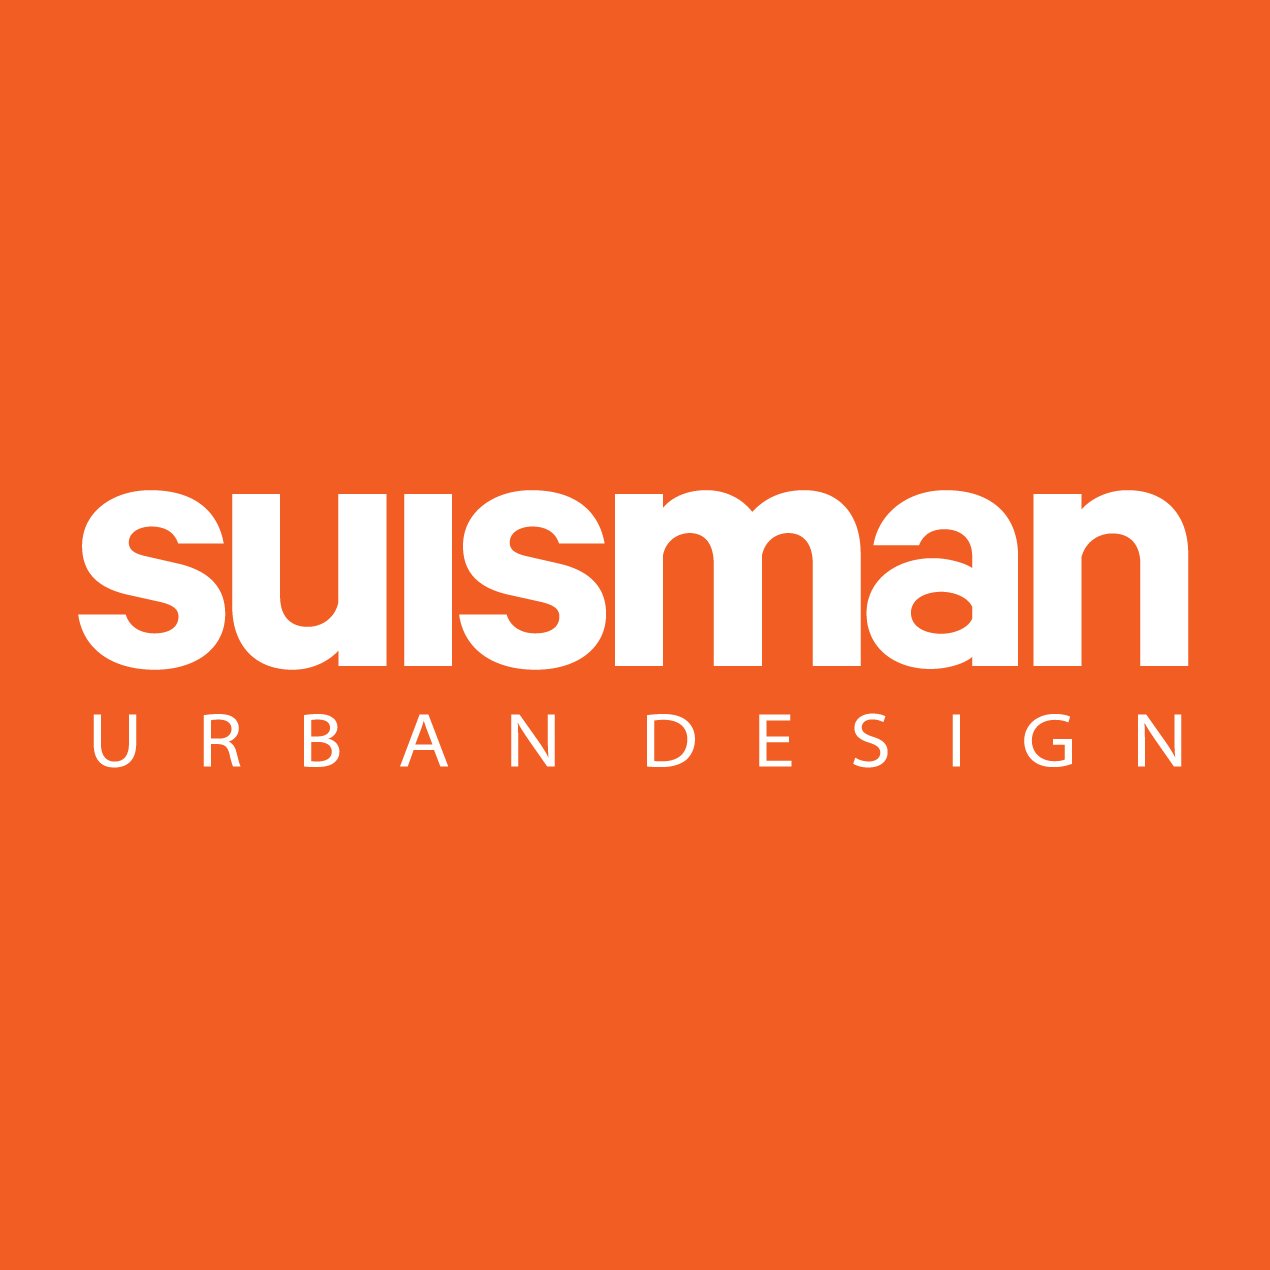 We're an award-winning, internationally recognized urban design studio, creating places that are Connected.Sustainable. Livable.Vibrant.Beautiful.  https://t.co/5zTcEsV8jS